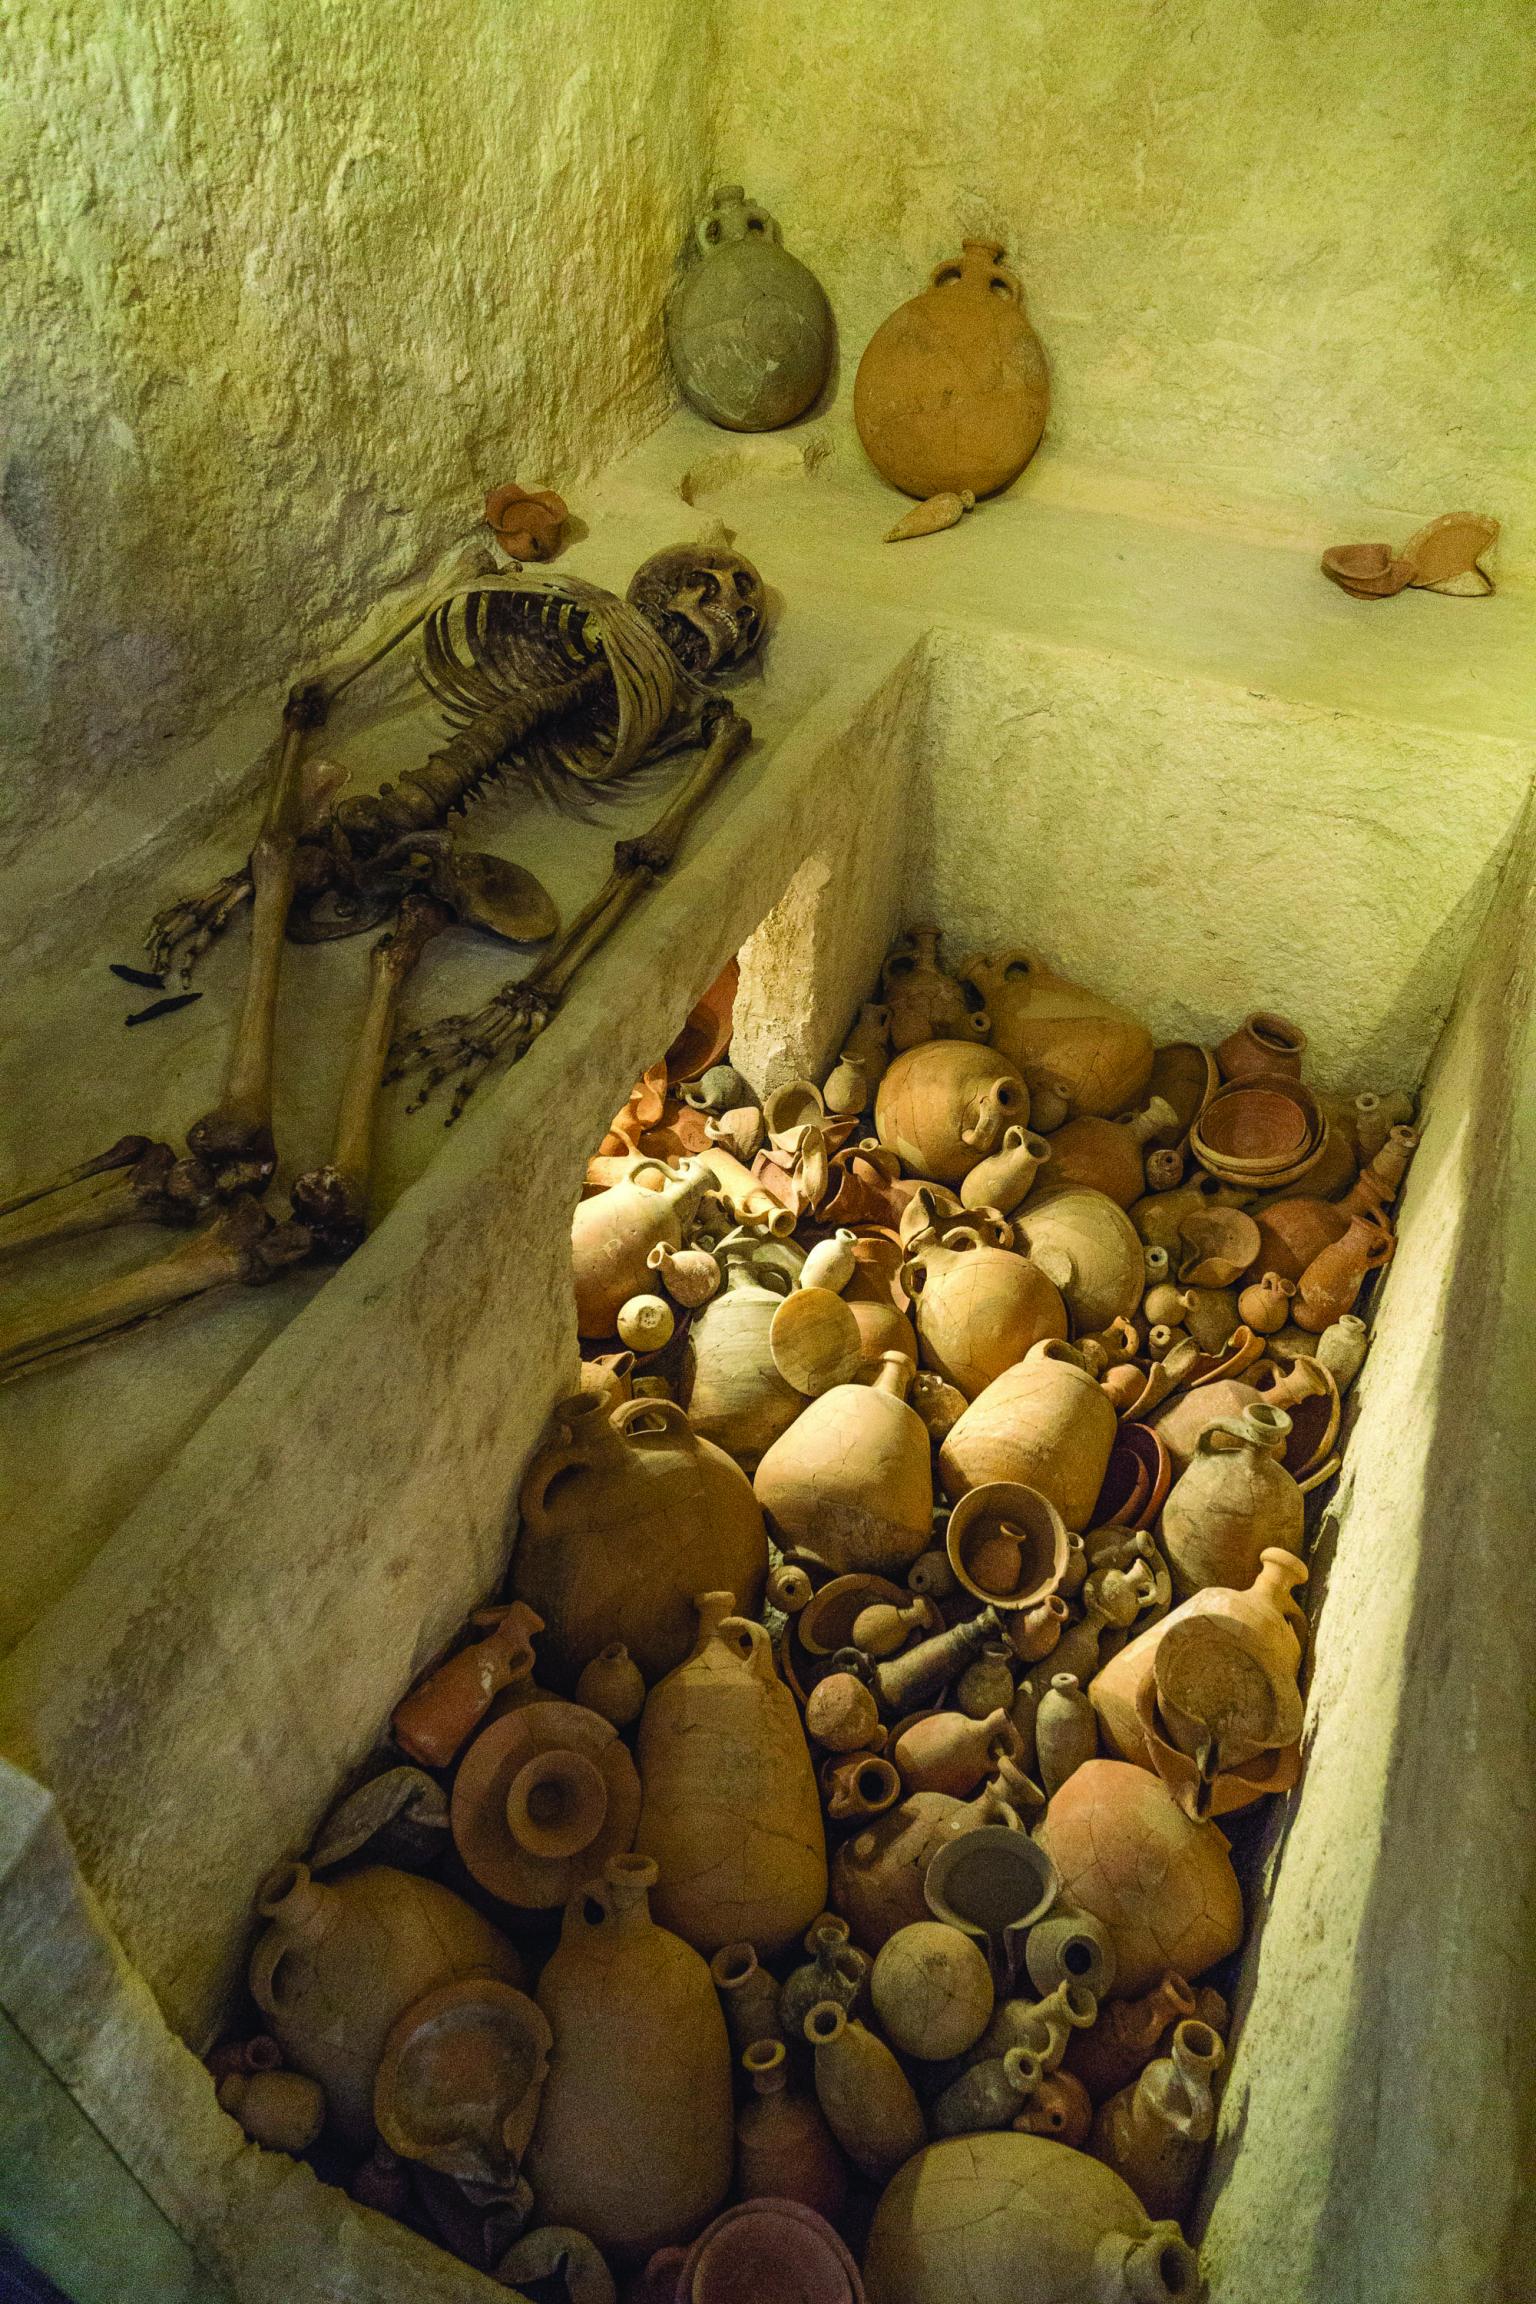 Interior room with ledges, one of which holds a skeleton, and a floor covered with pottery.